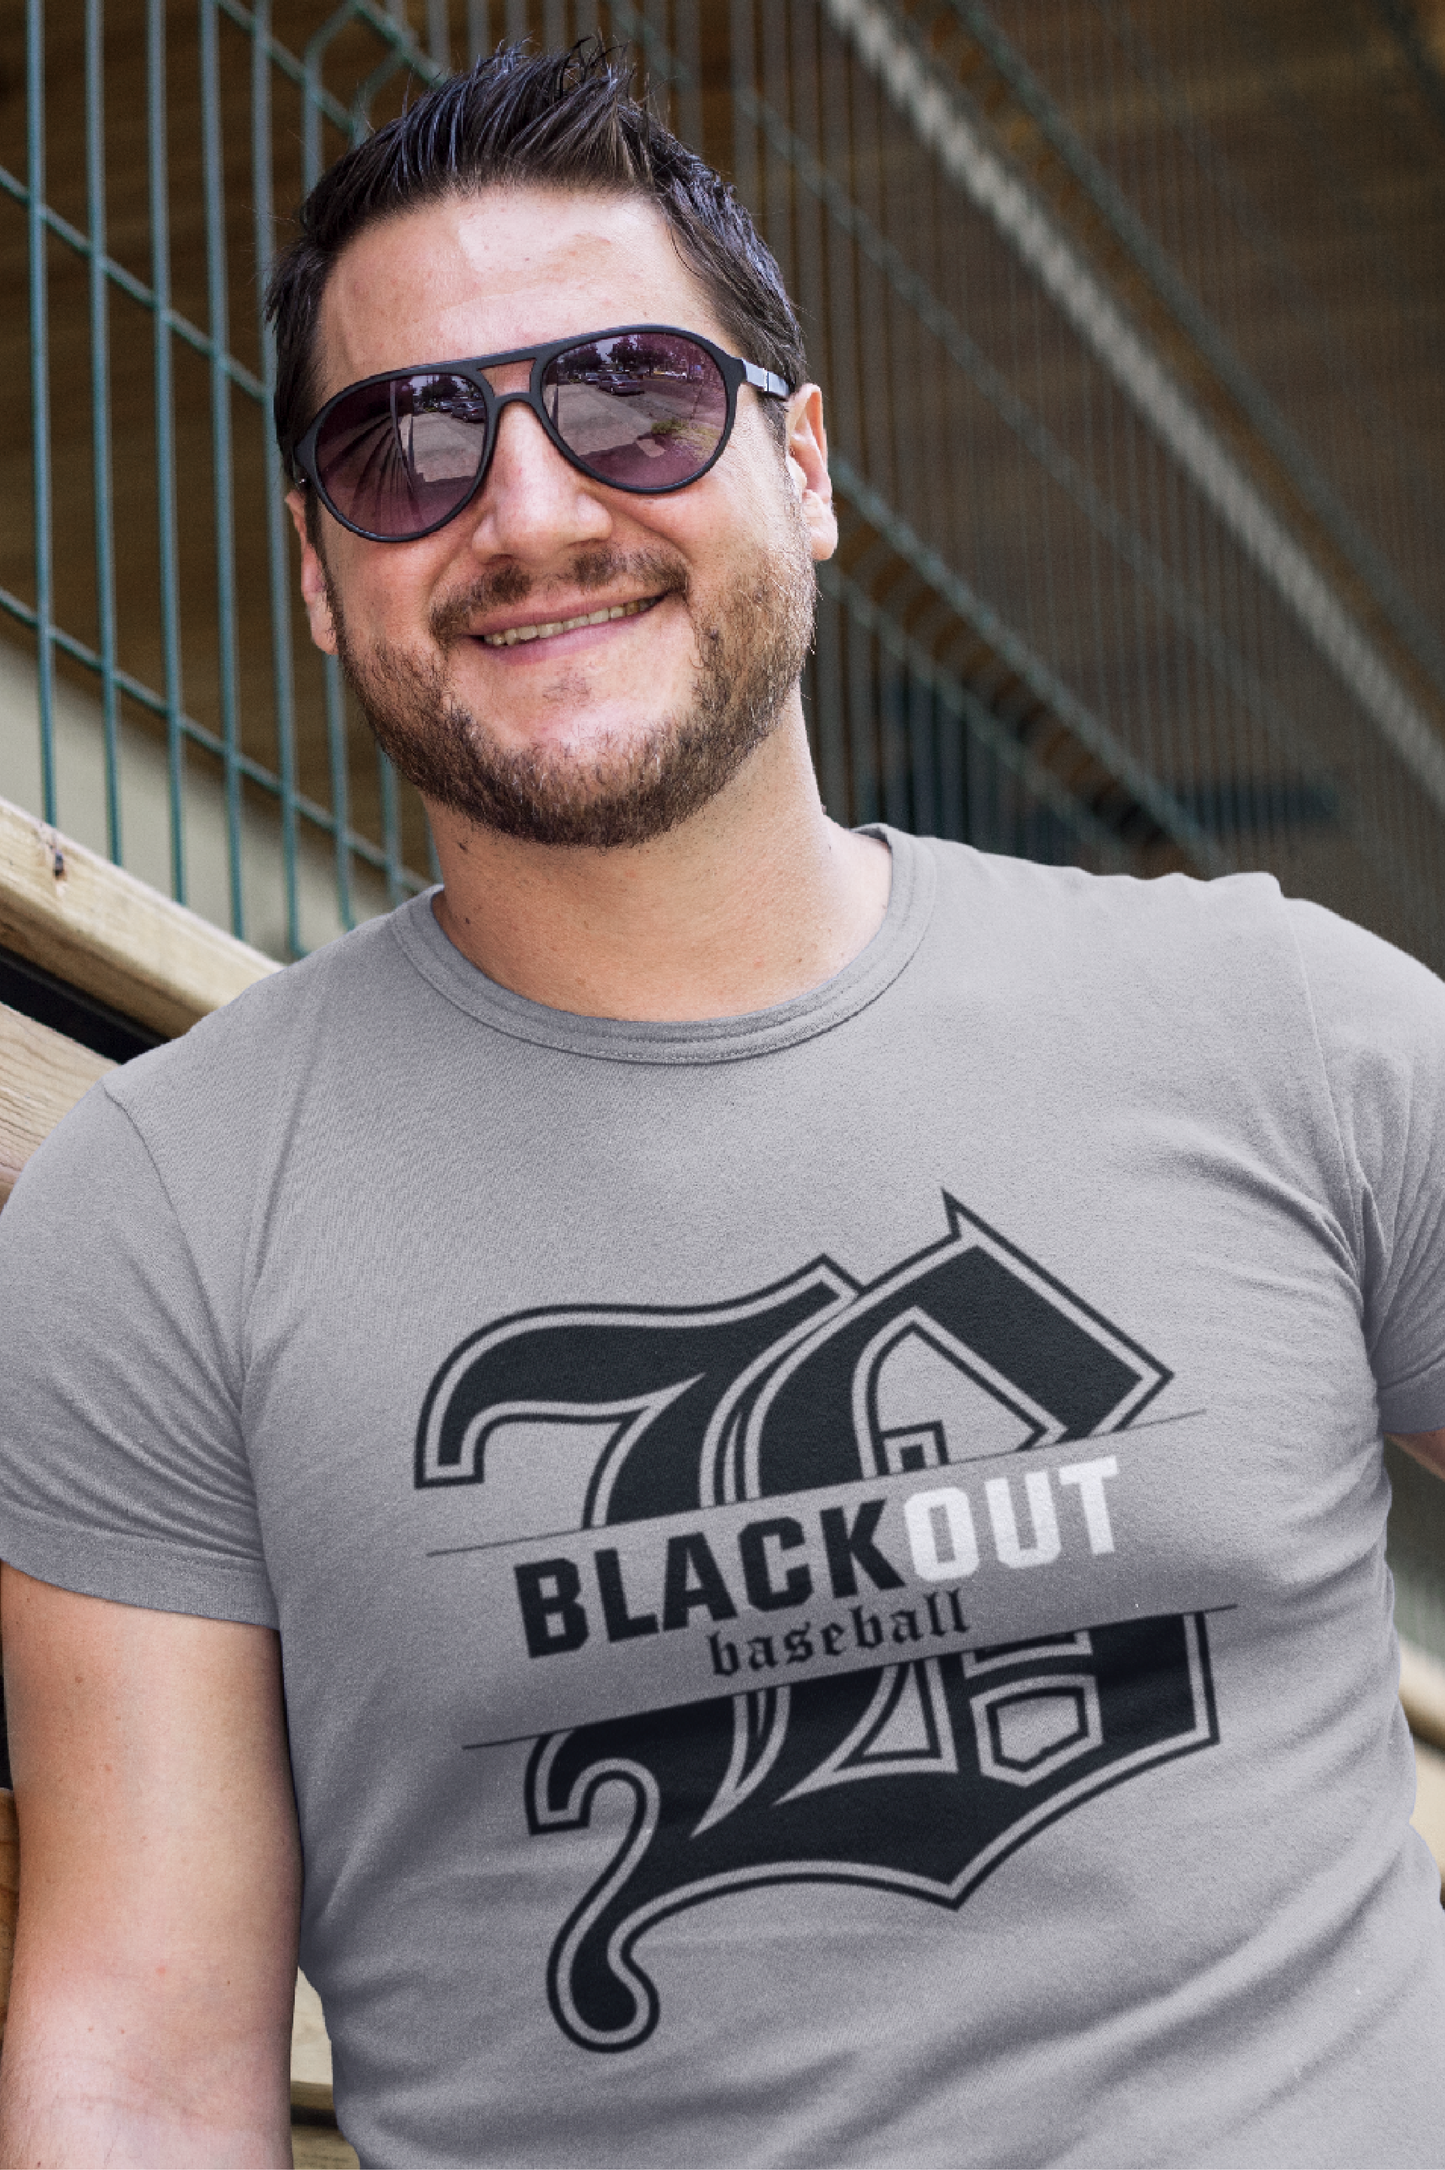 ADULT - PERSONALIZED Name - "Blackout Baseball" Moisture-Wicking T-Shirt - (Black, White, or Gray)